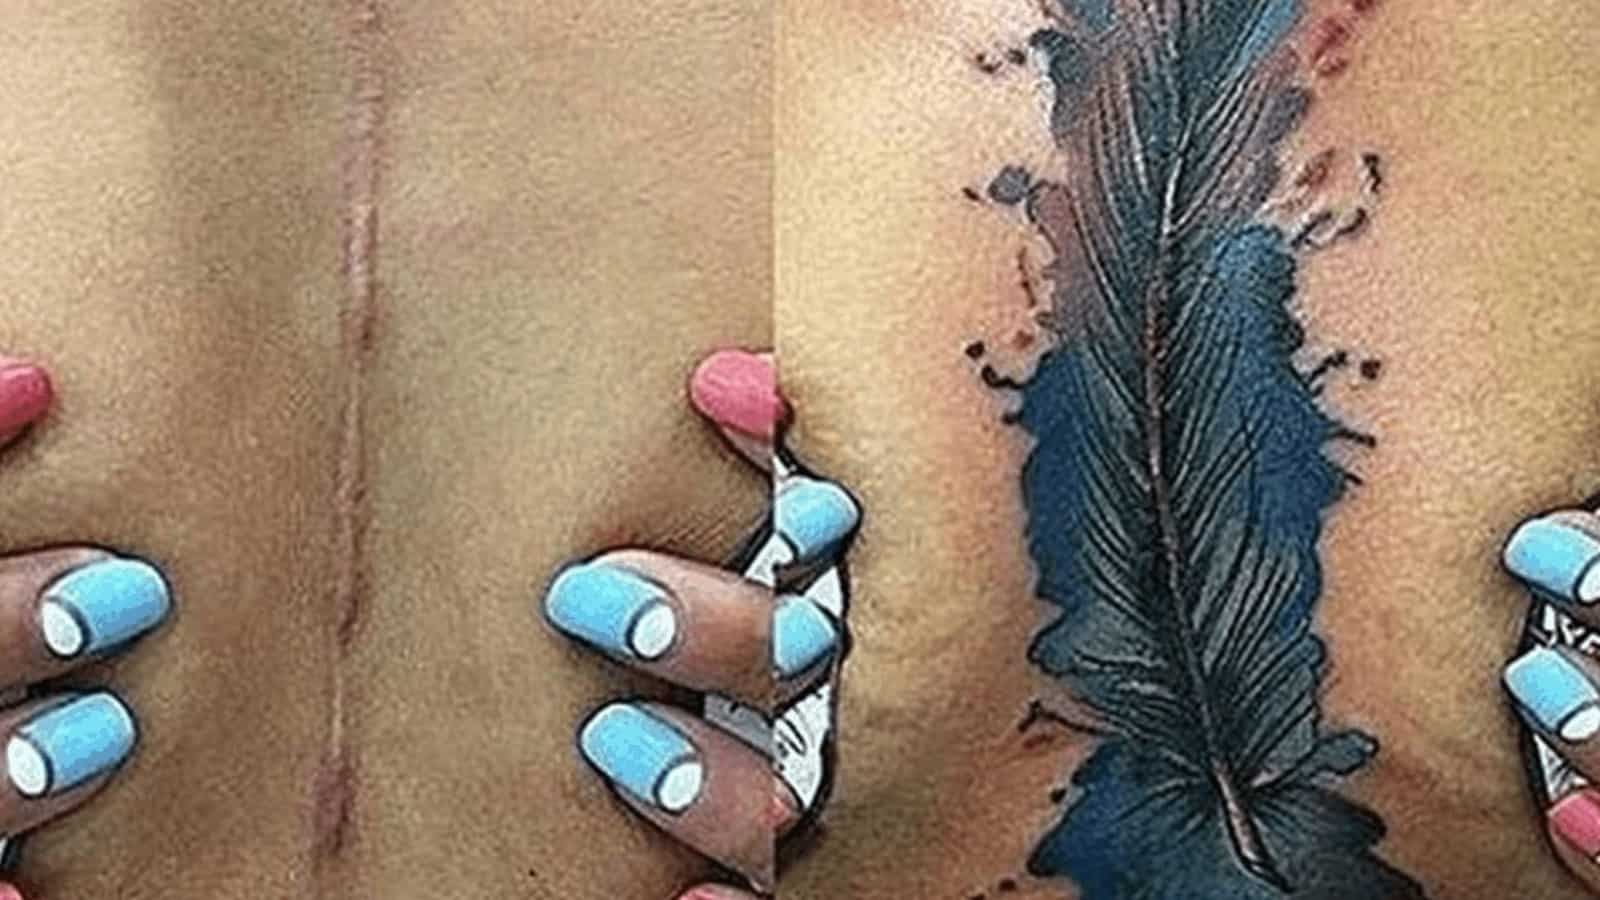 Small Belly Piece by @vlada.2wnt2 - Tattoogrid.net